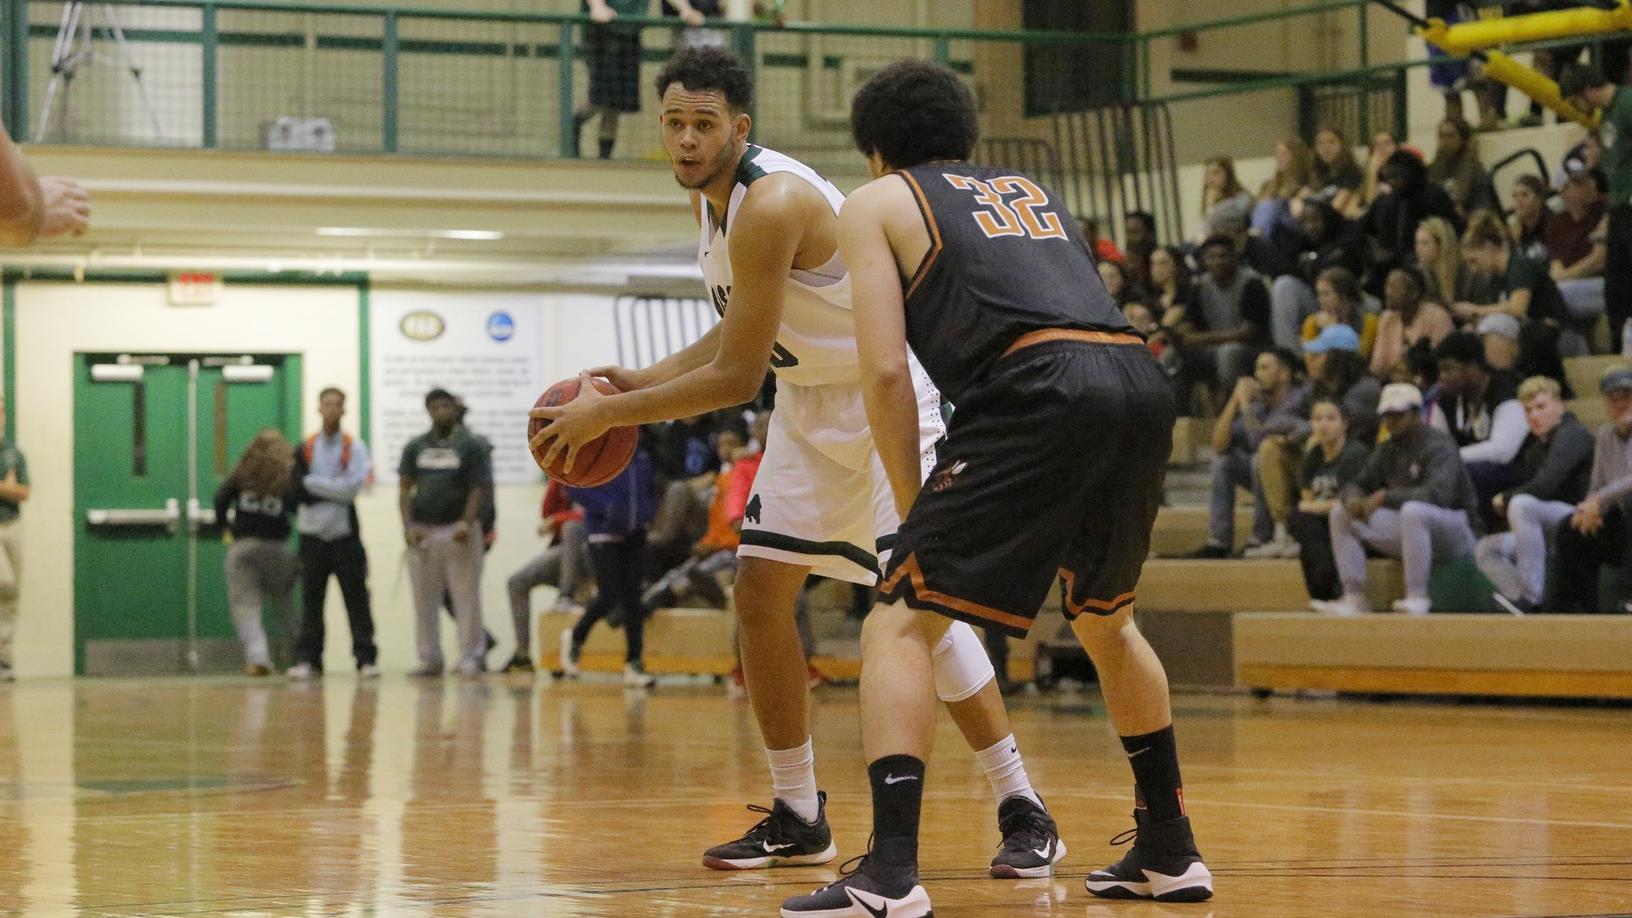 Men's basketball defeated by Lancaster Bible, 83-69